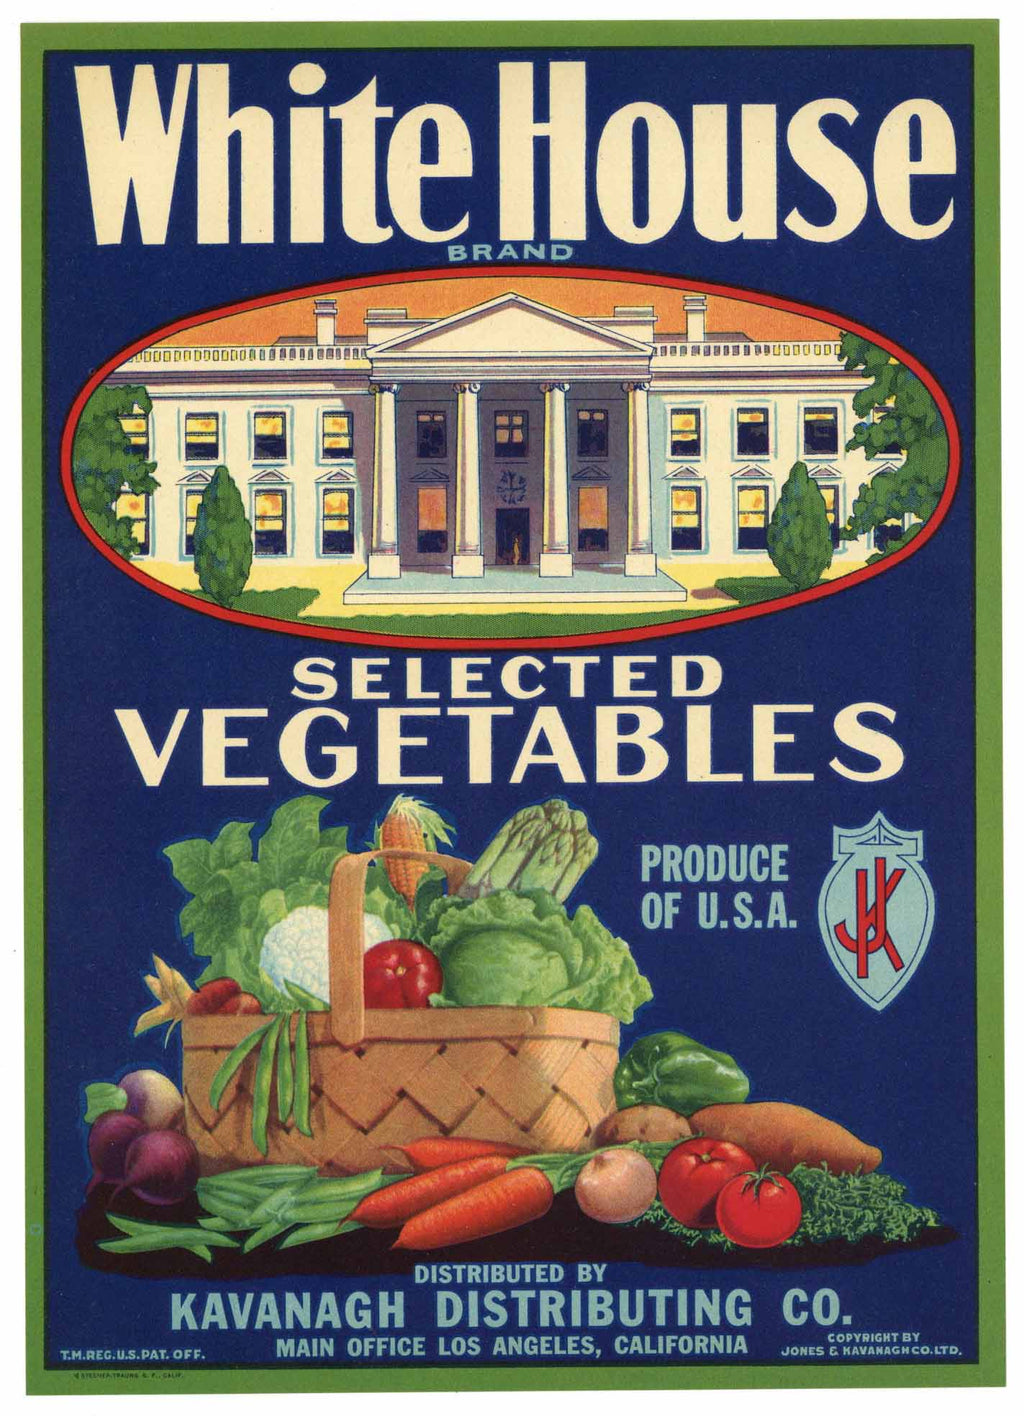 White House Brand Vintage Vegetable Crate Label